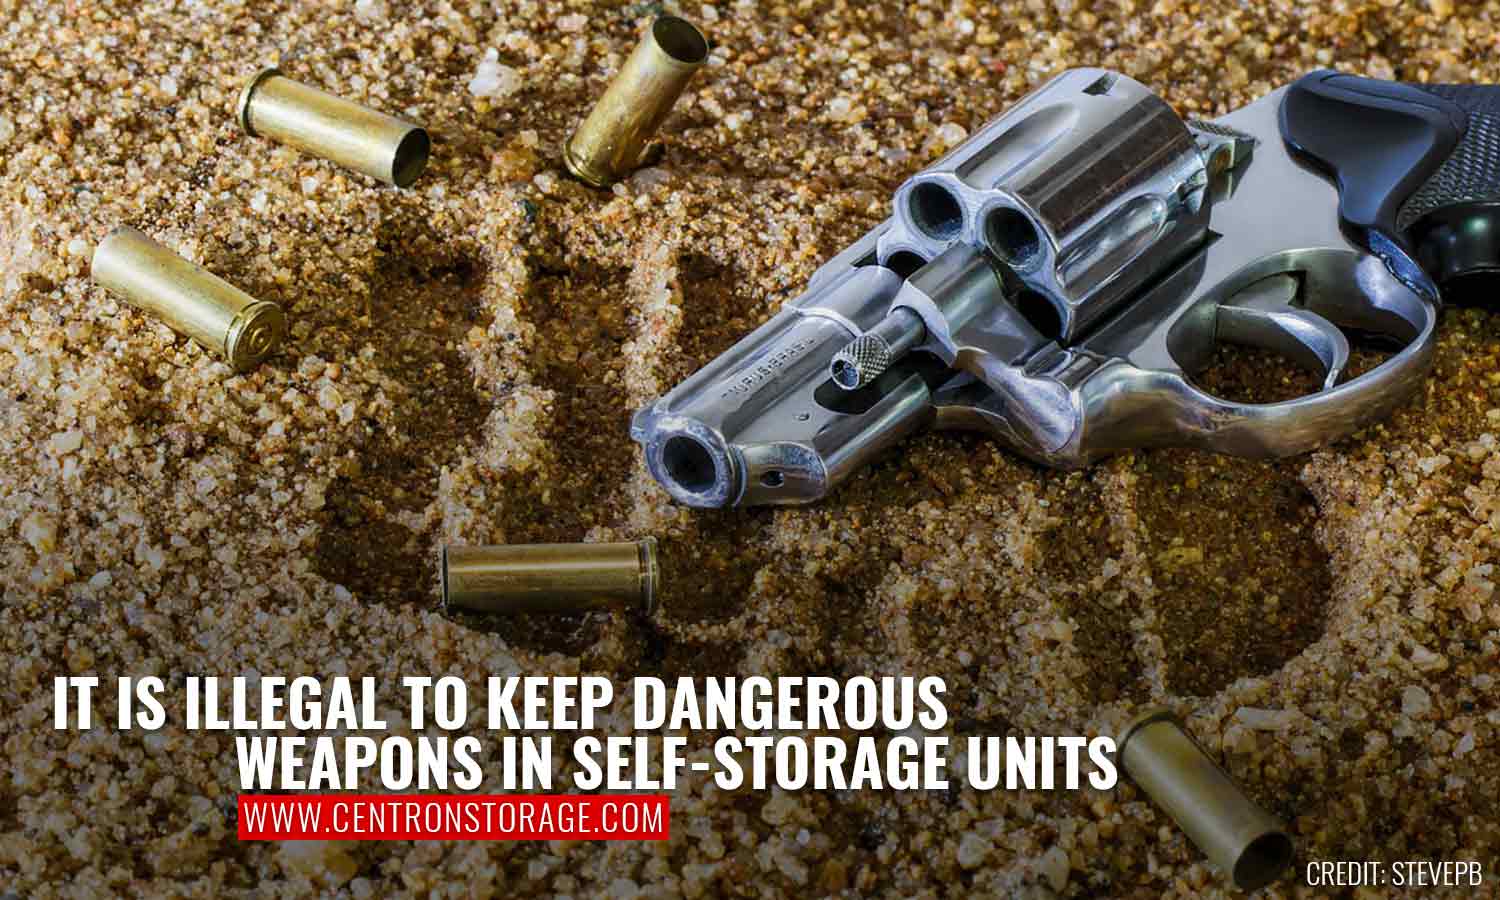 It is illegal to keep dangerous weapons in self-storage units